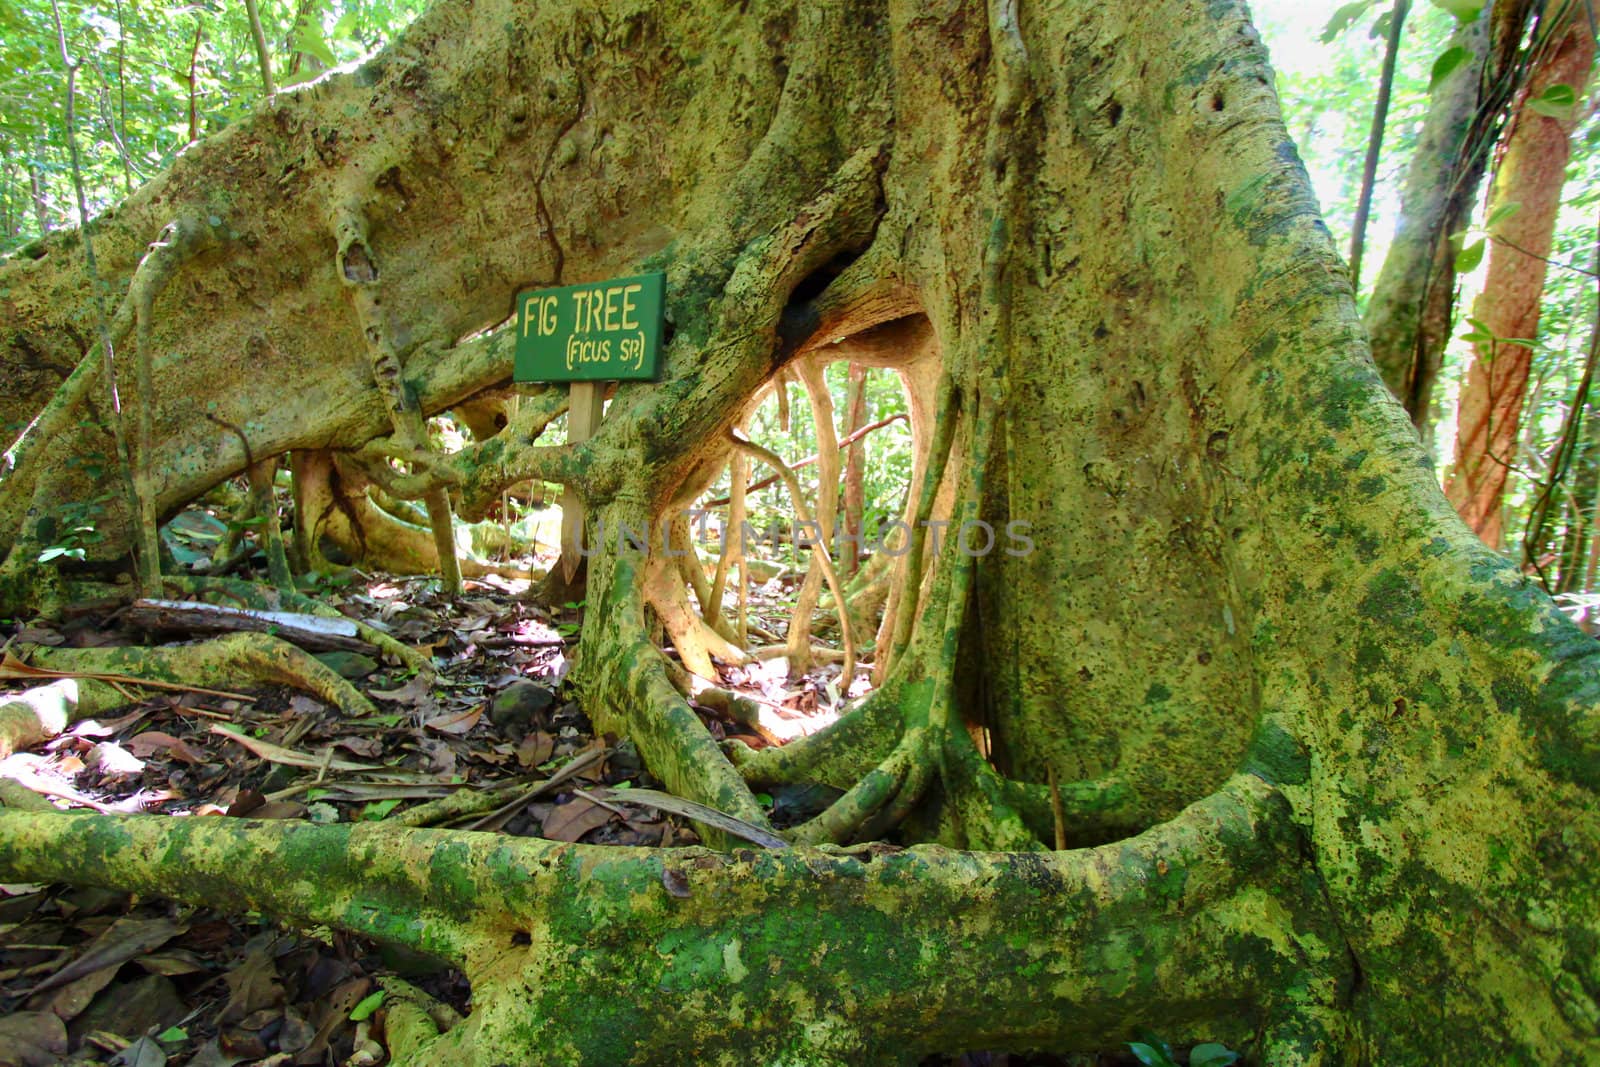 Spreading roots of a fig tree in Sage Mountain National Park of Tortola.